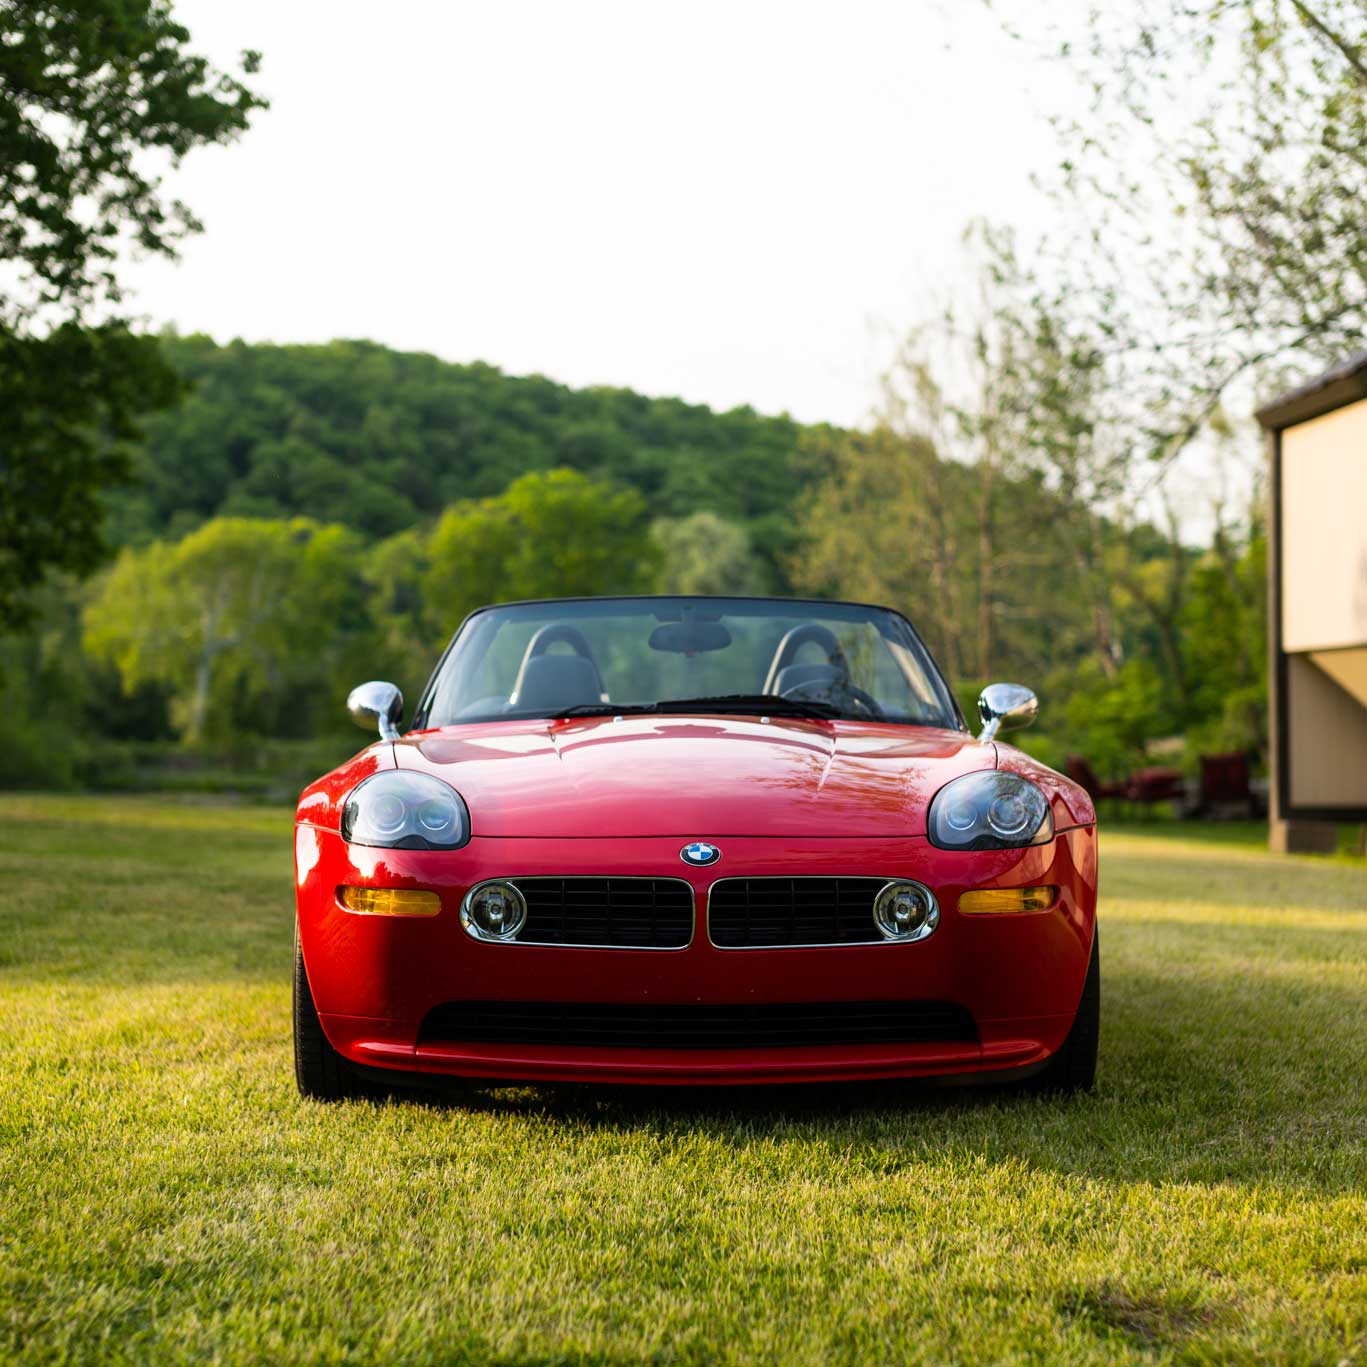 2000 BMW Z8 in red – coming soon.